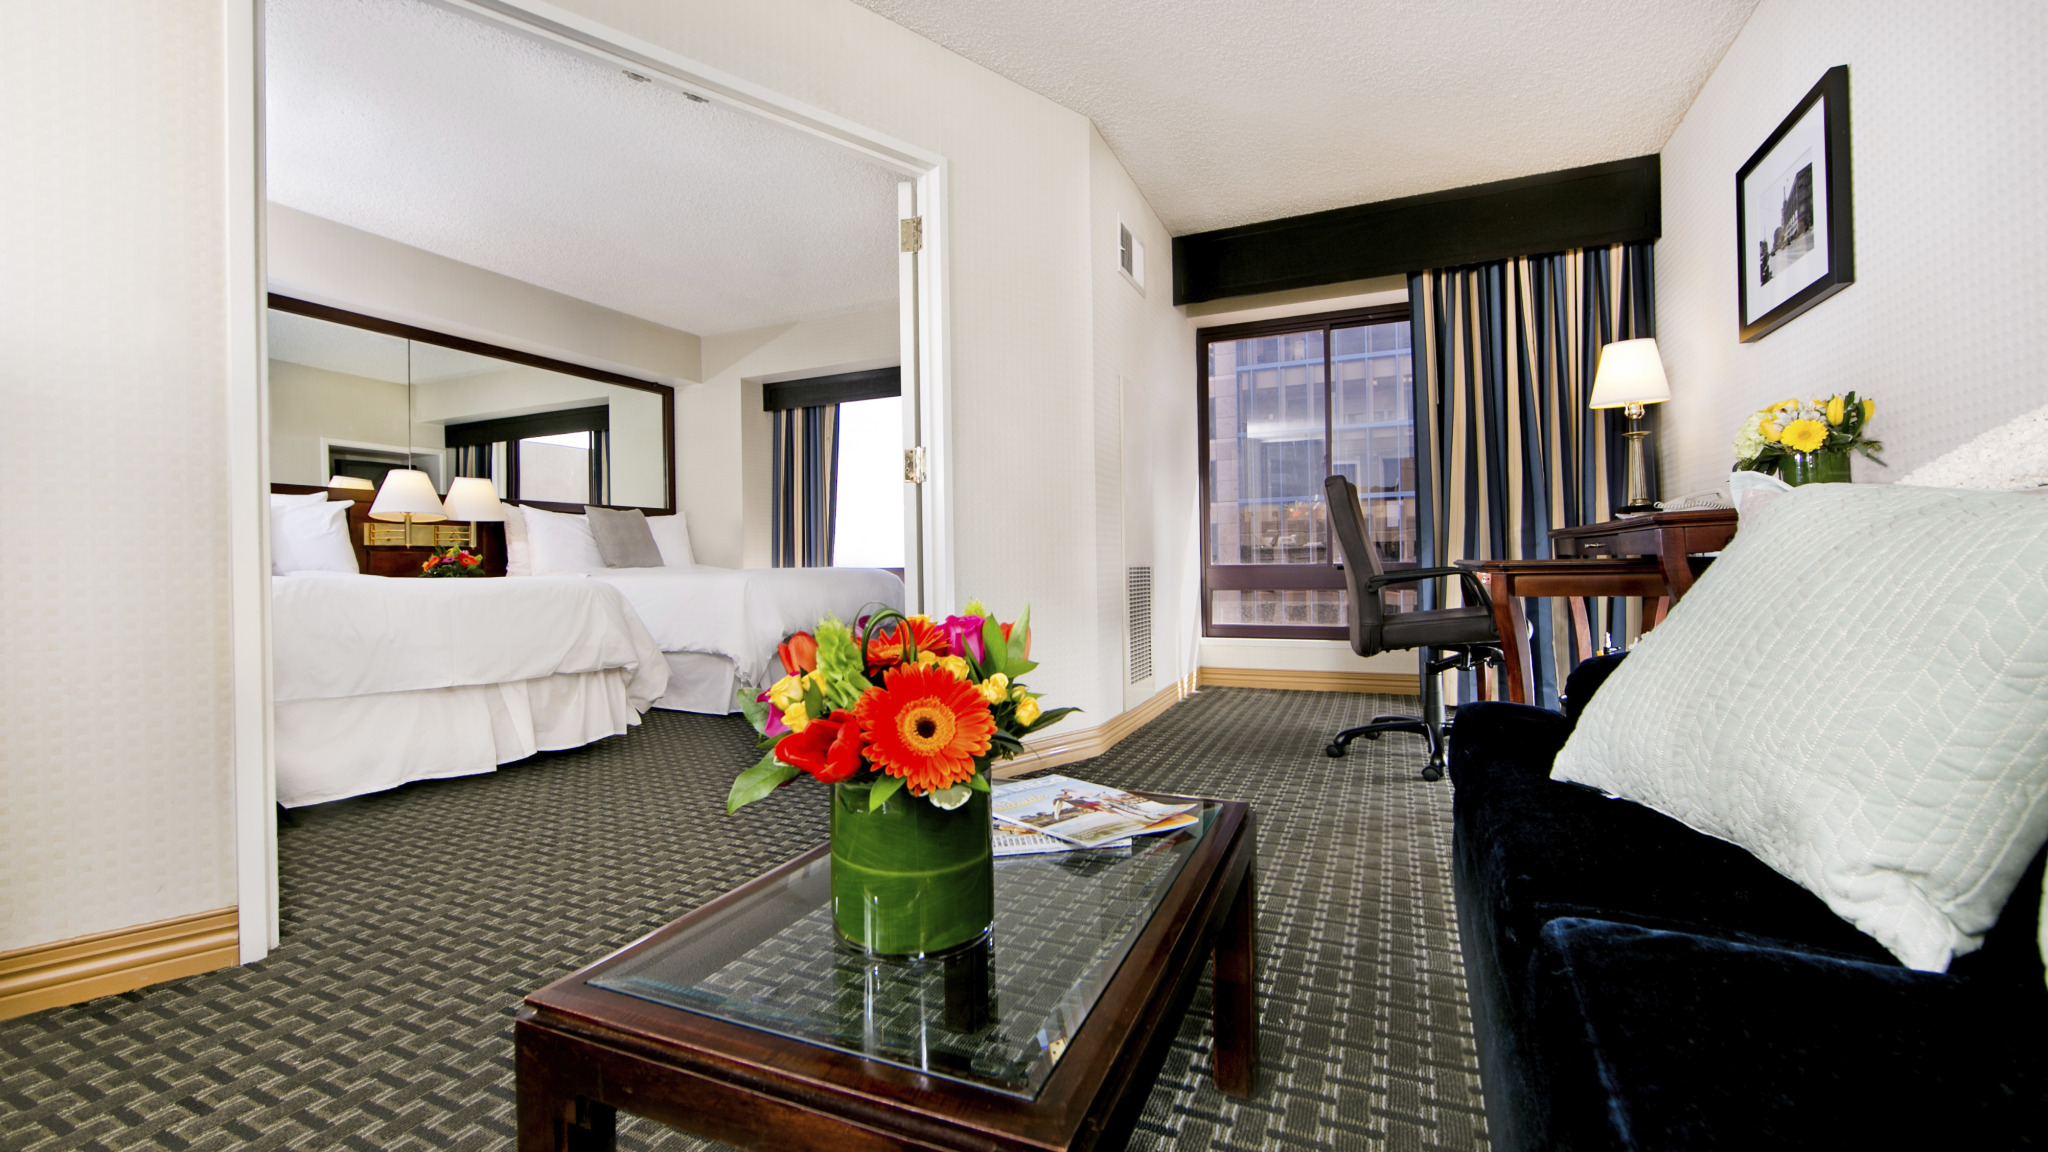 Declan Suites San Diego is a perfectly located San Diego Hotel.